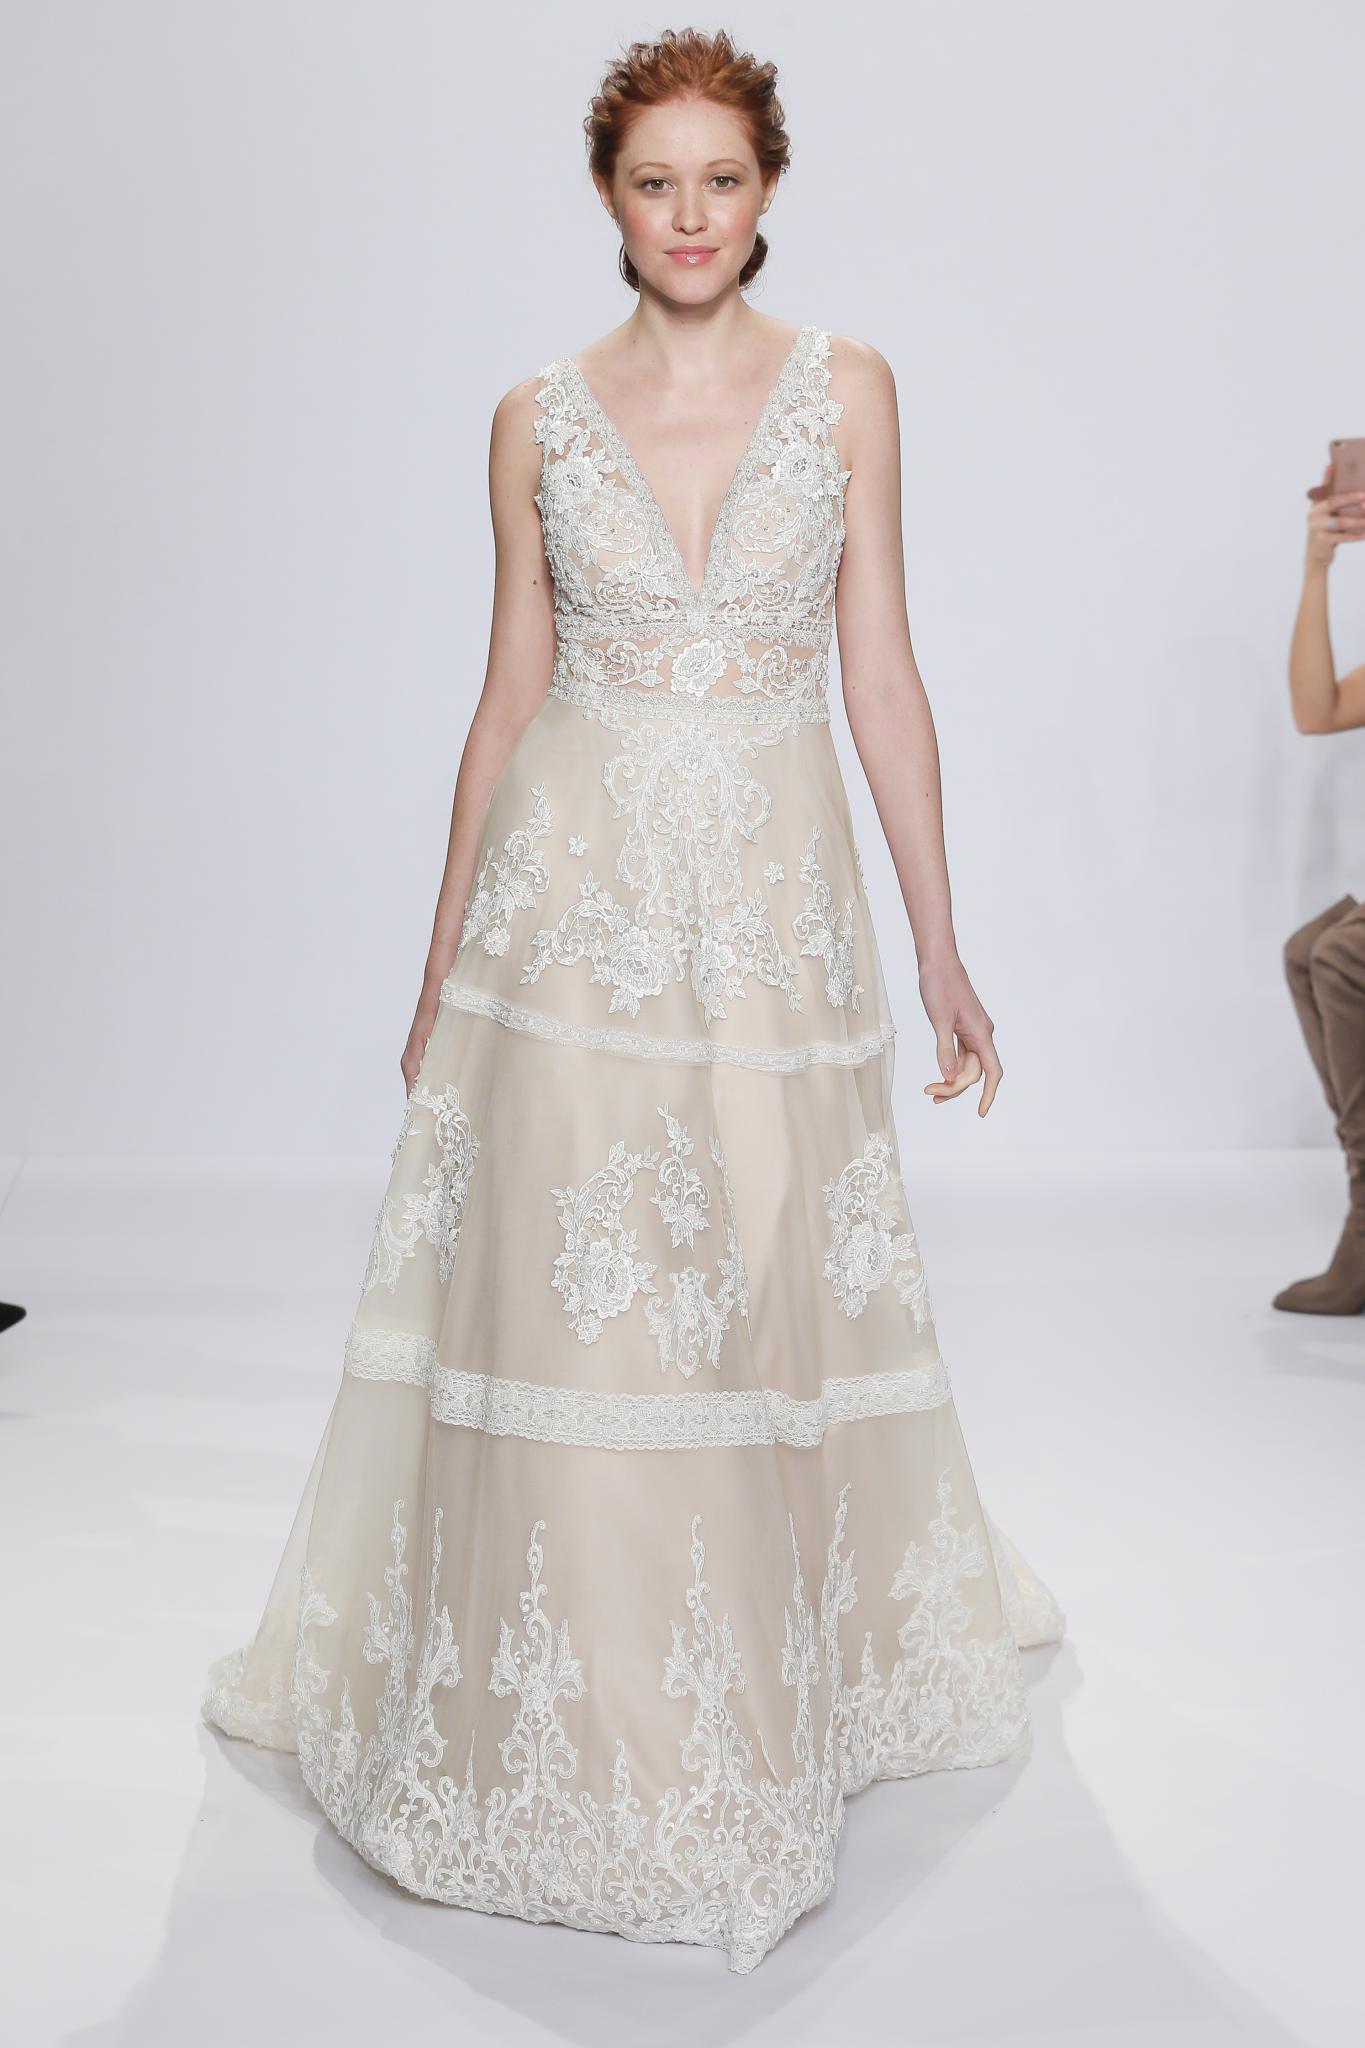  Randy  Fenoli  S S 2019 Bridal  Collection ChicagoStyle 